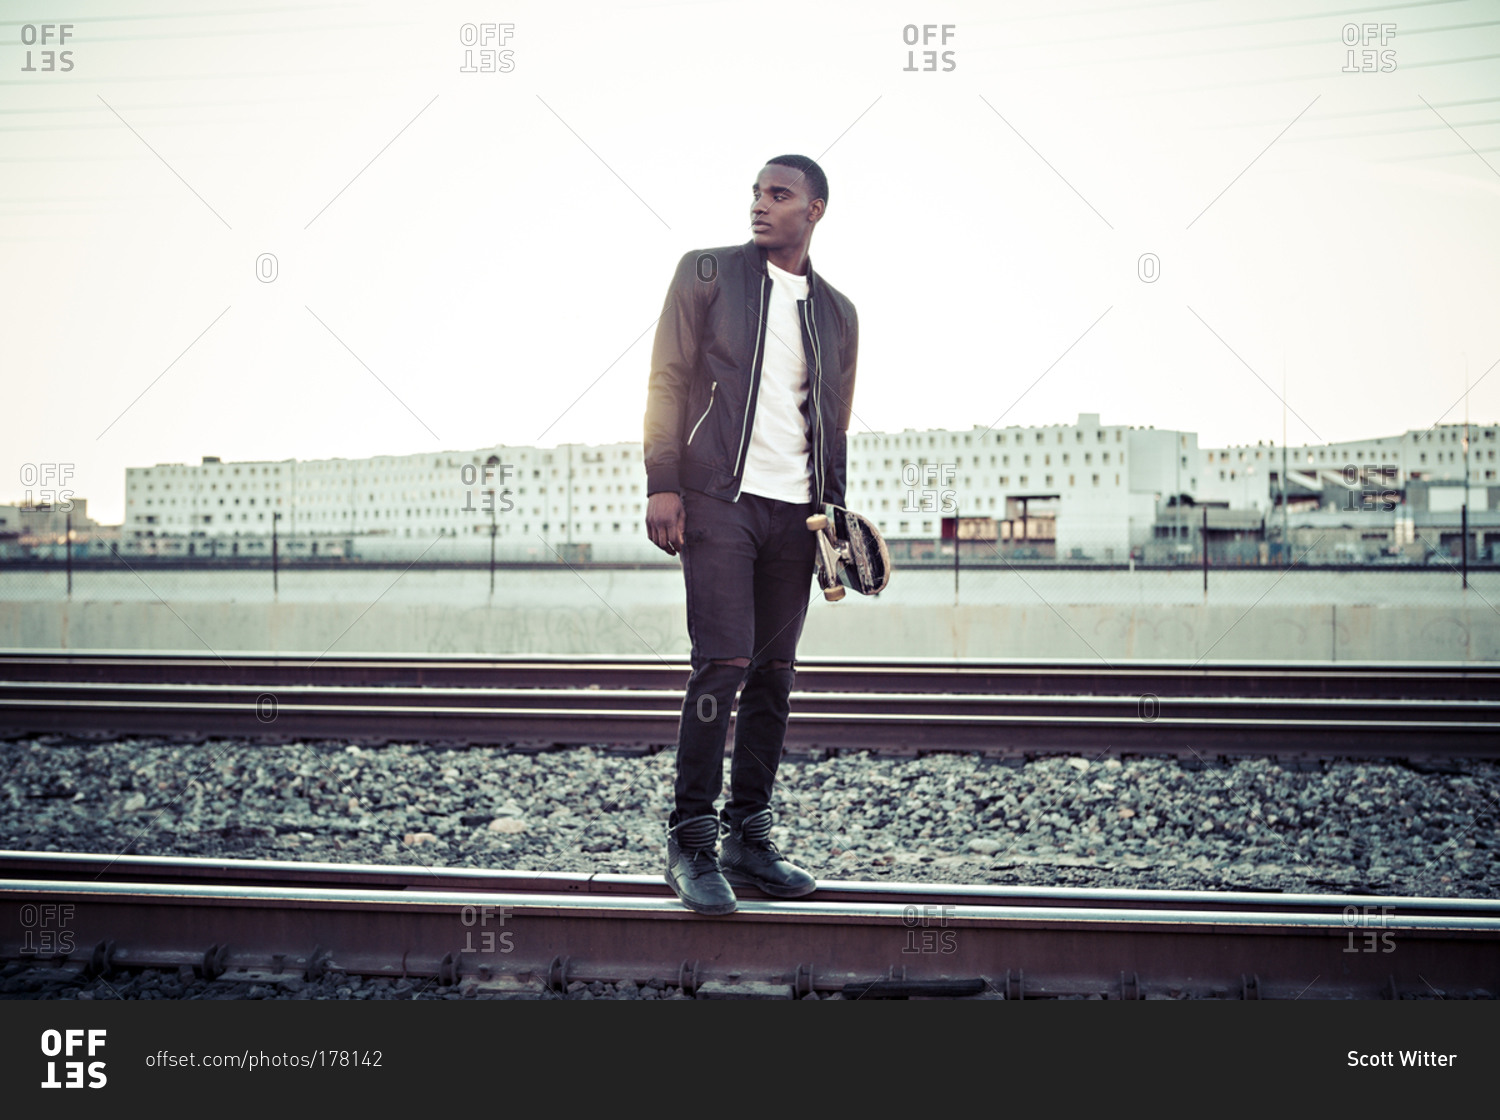 A skateboarder stands on train tracks